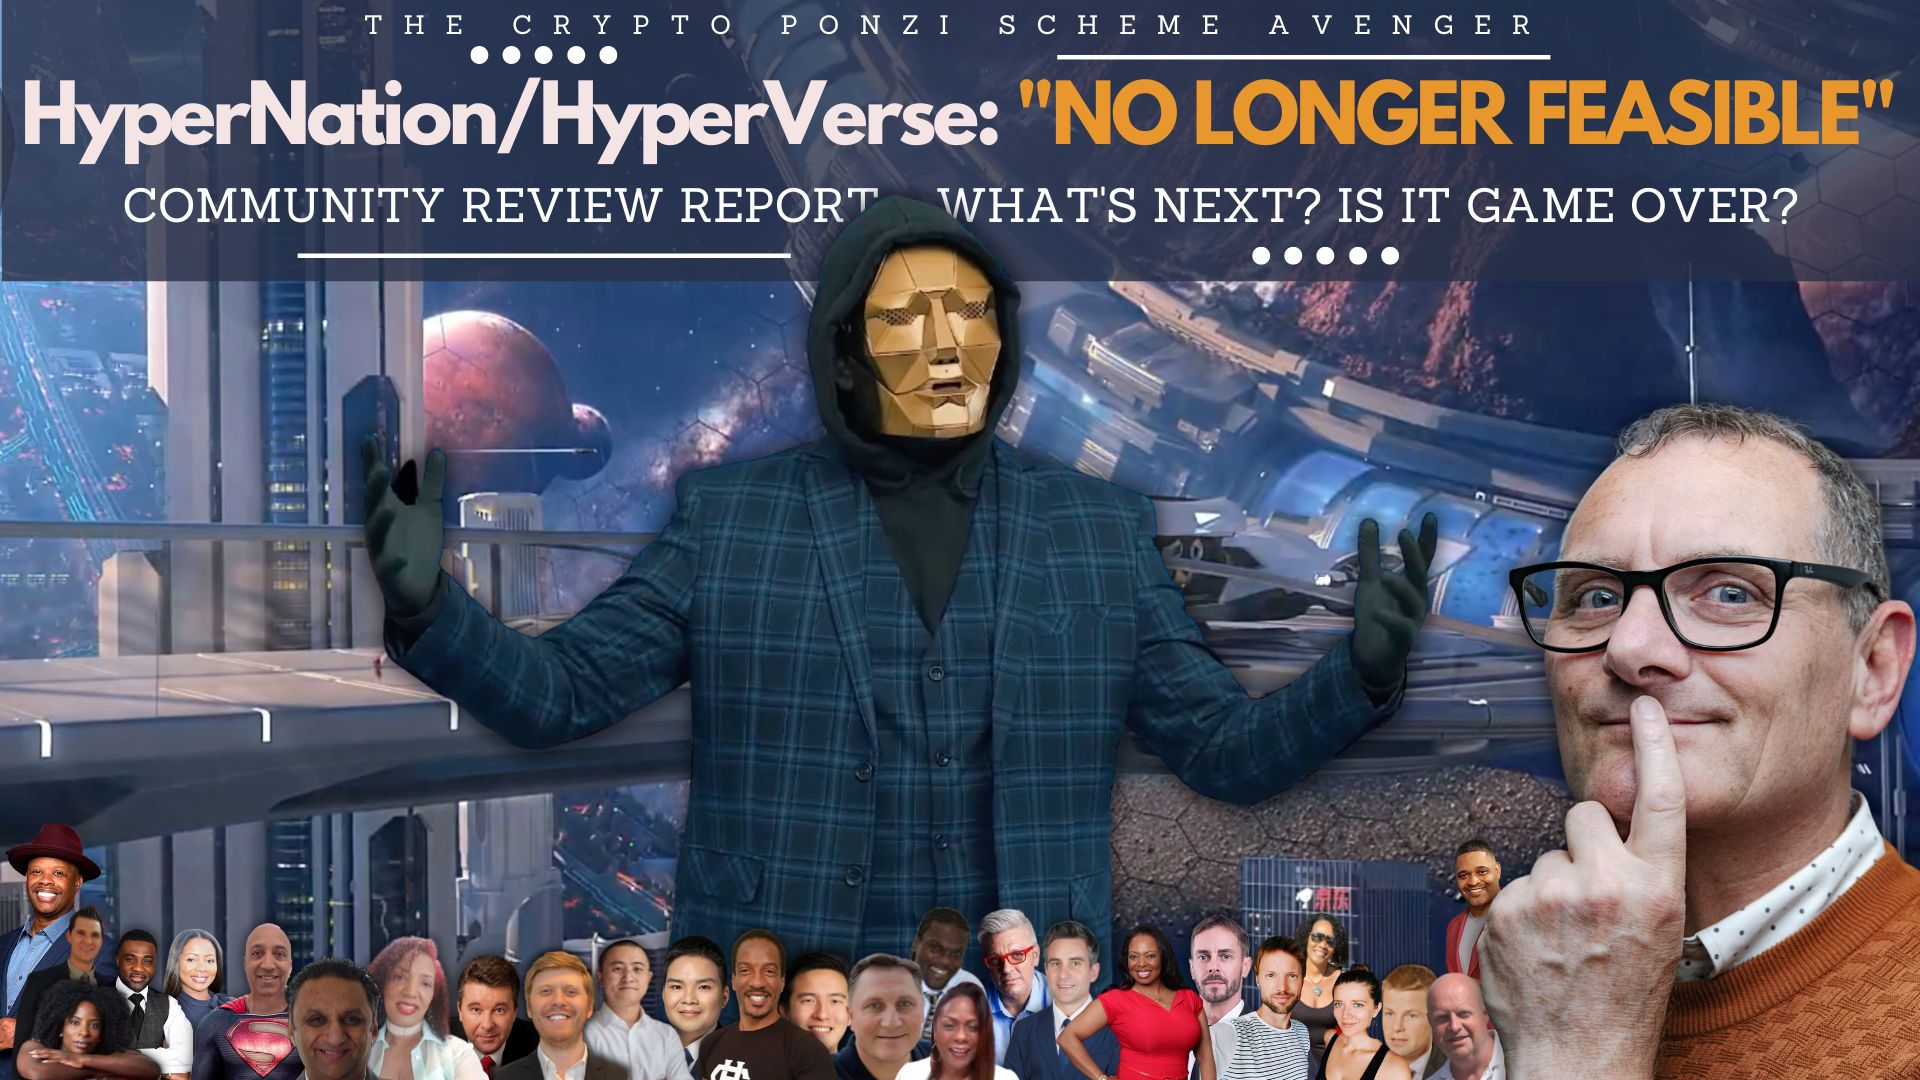 HyperNation/HyperVerse: "NO LONGER FEASIBLE" Community Review Report - What's Next? Is it GAME OVER?